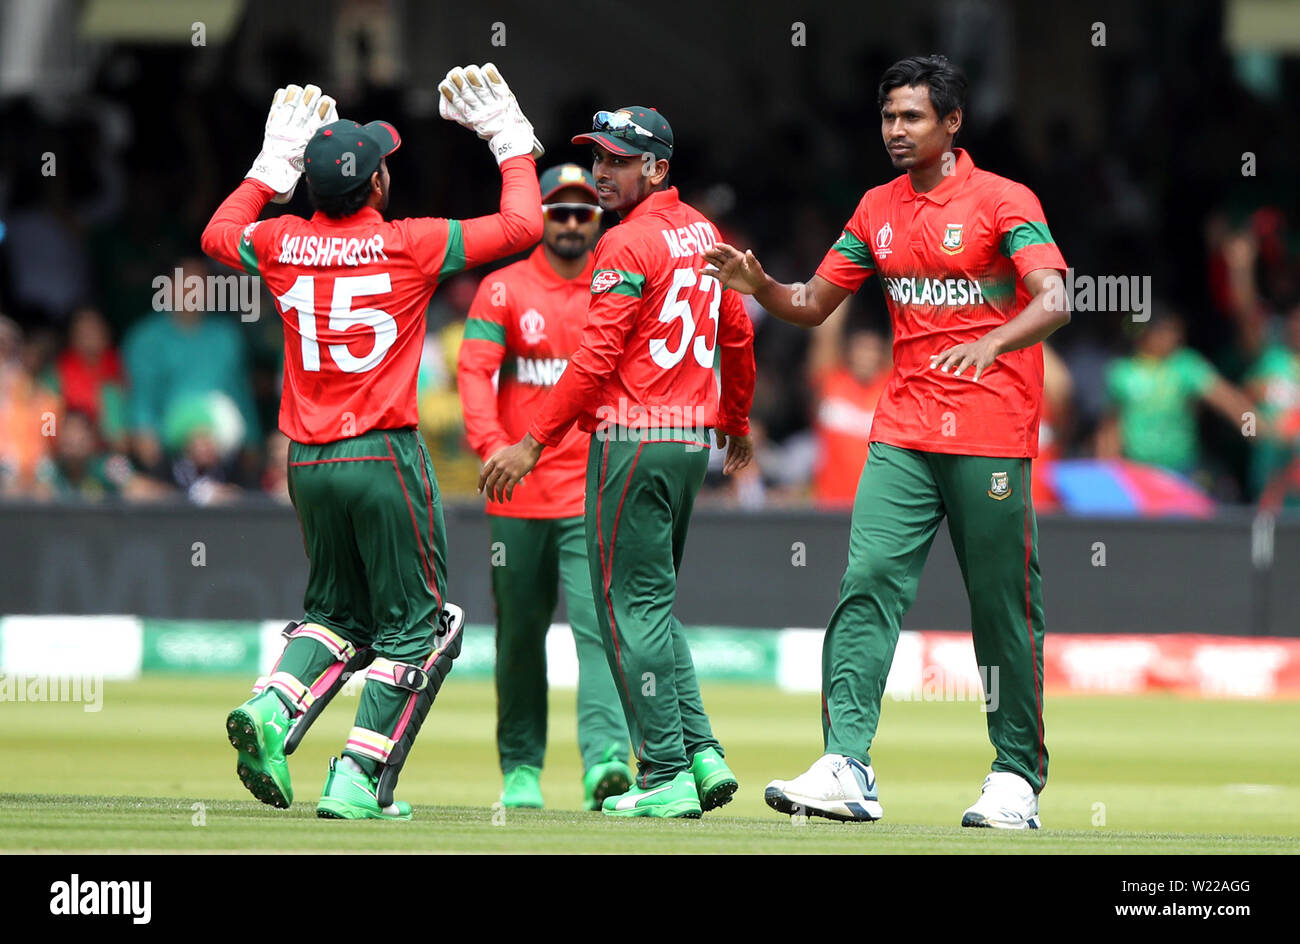 Pakistan's Bangladesh's Mushfiqur Rahim (right) celebrates with Mehedi Hasan Miraz and Mushfiqur Rahim (left) after taking the wicket of Pakistan's Haris Sohail during the ICC Cricket World Cup group stage match at Lord's, London. Stock Photo